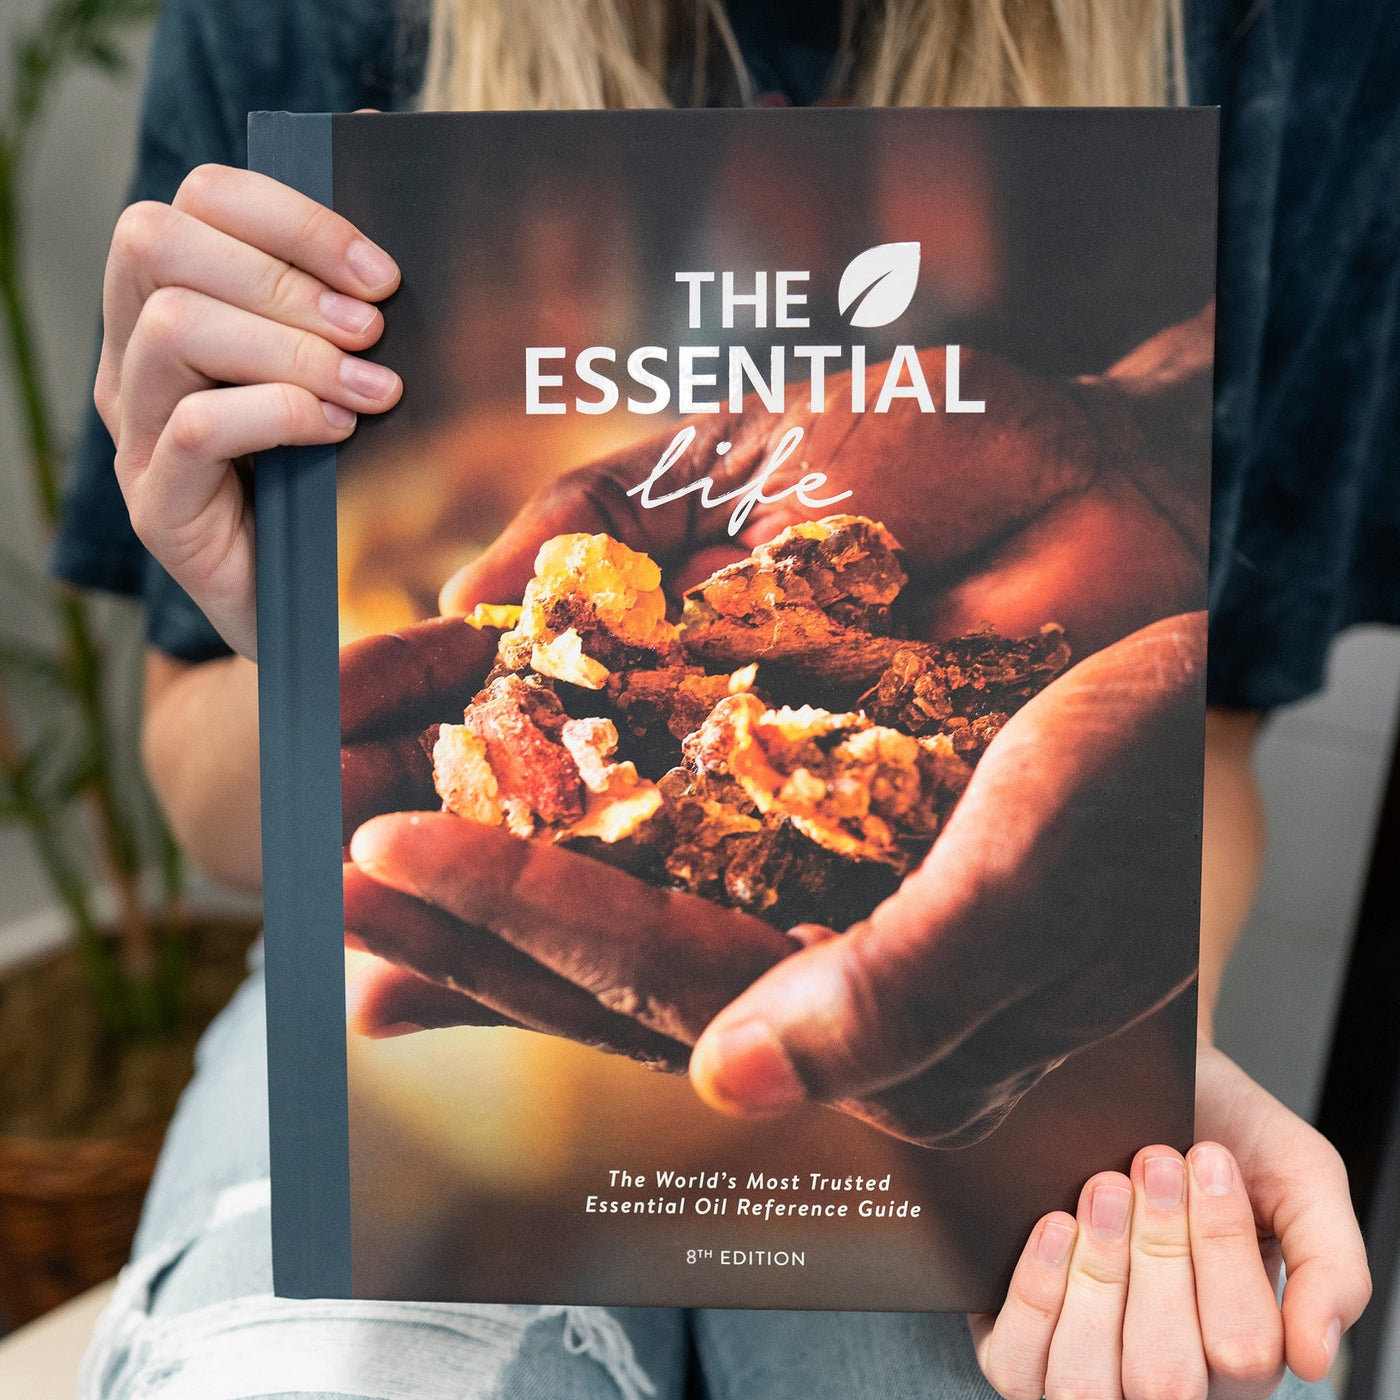 The Essential Life Book 8th Edition - Oil Life Canada - Canada's Best Essential Oil Supplies